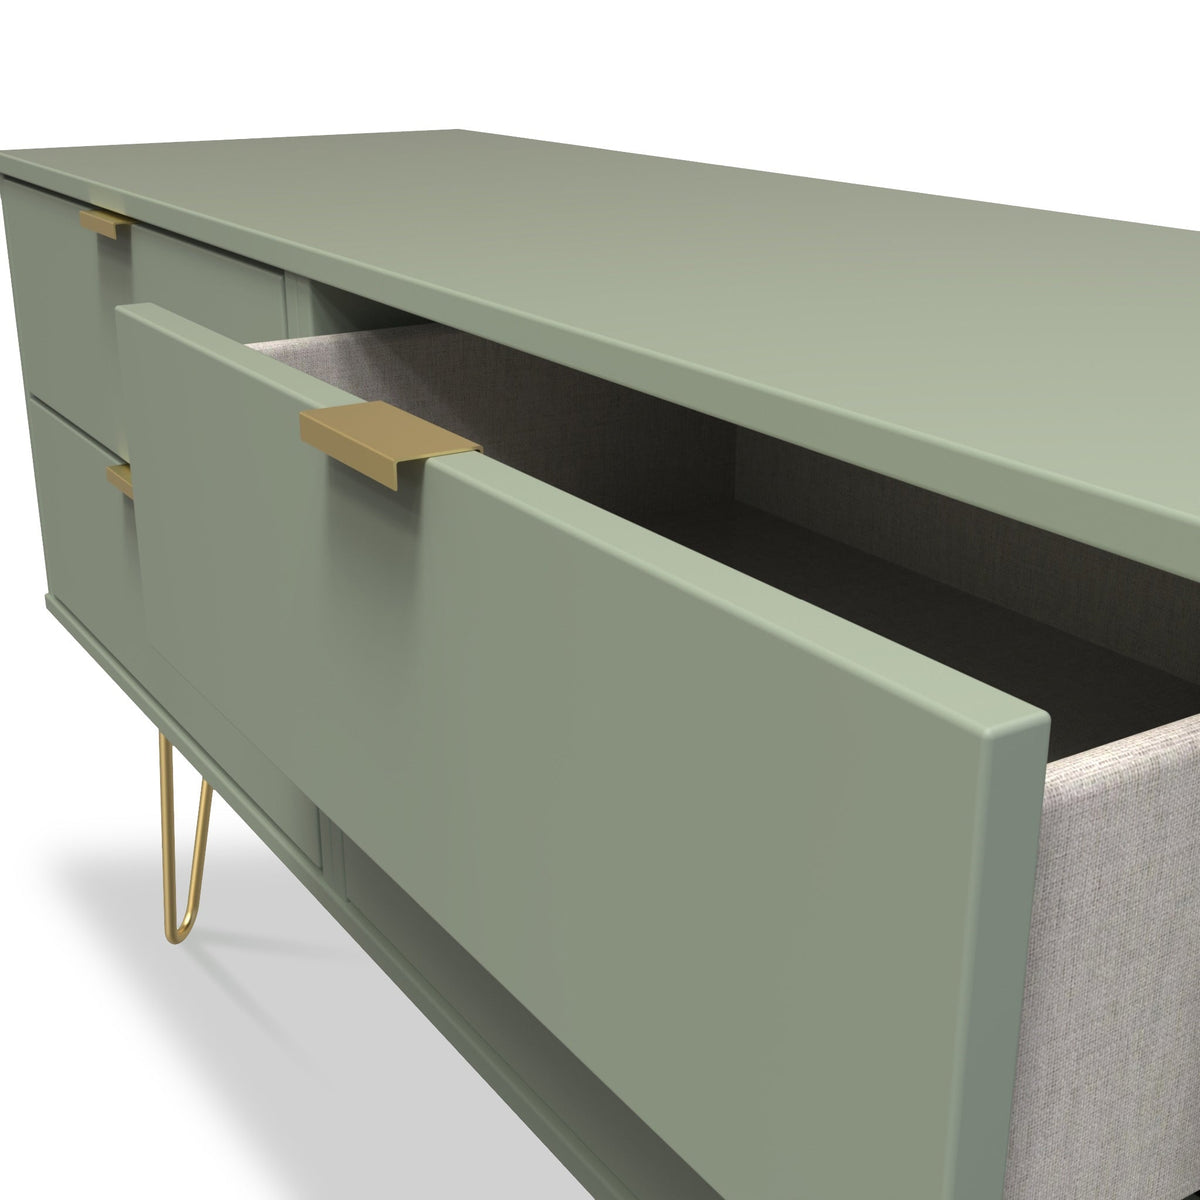 Moreno Olive Green Low 4 Drawer Chest with gold hairpin legs drawer close up